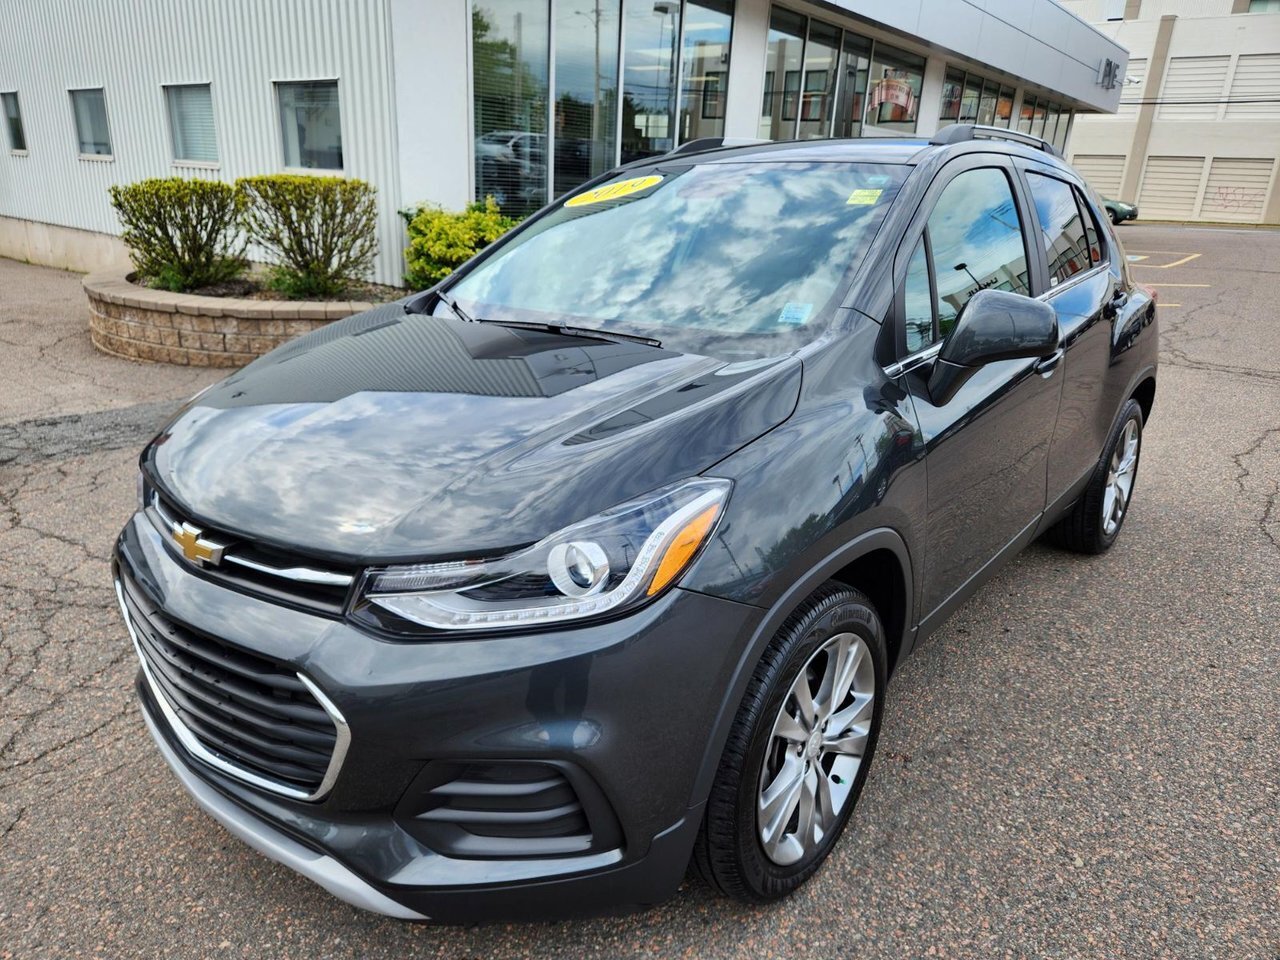 2019 Chevrolet Trax LT 2019 Chevy Trax: Compact, Capable, Connected